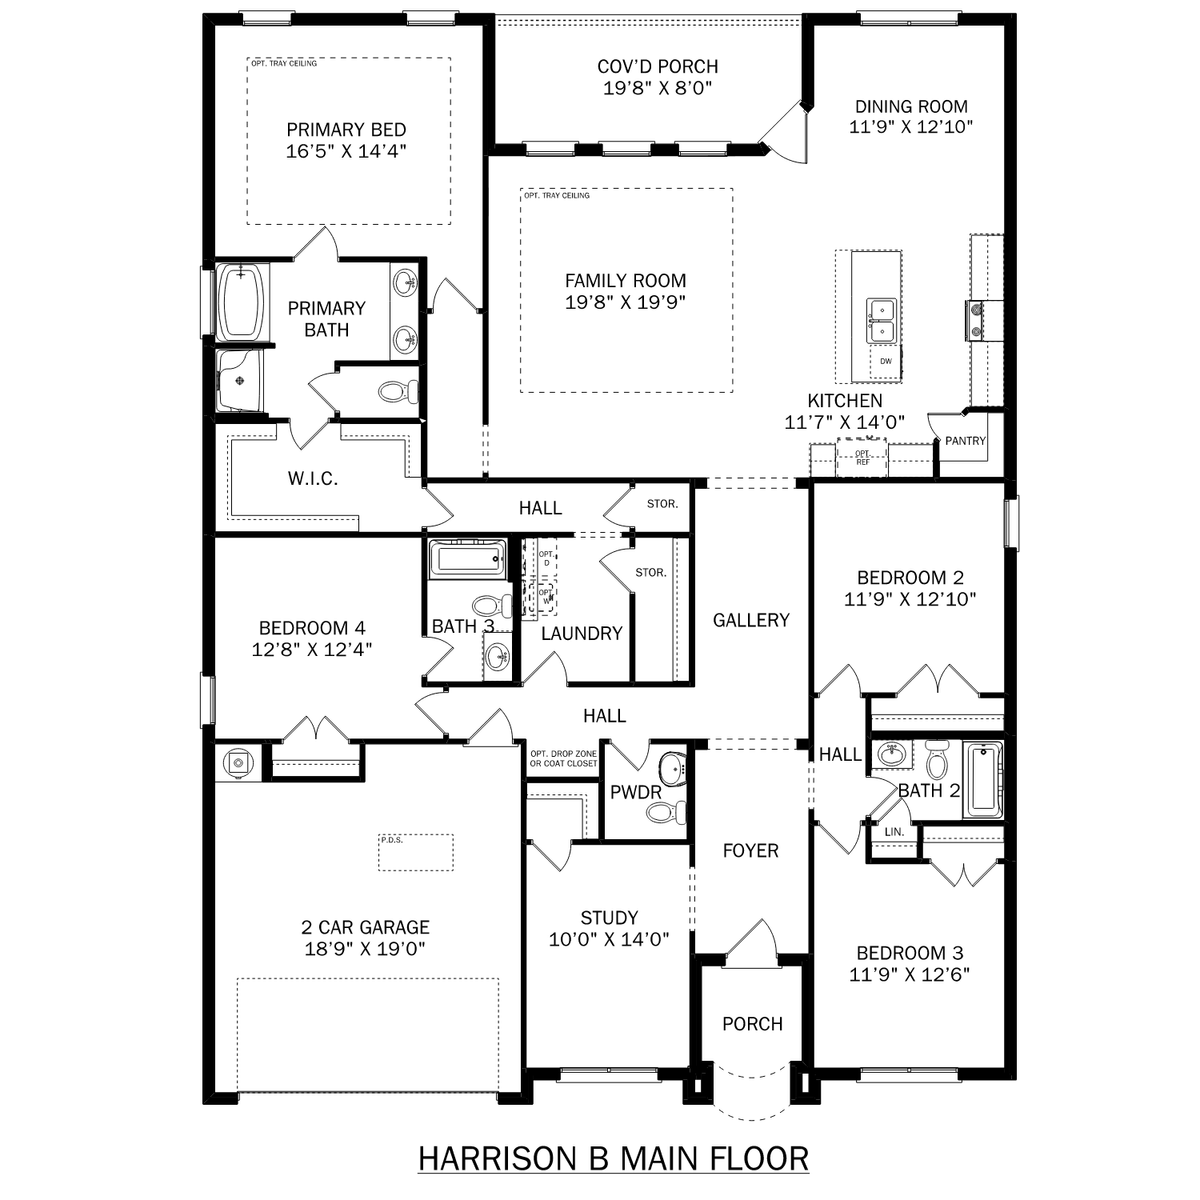 1 - The Harrison B buildable floor plan layout in Davidson Homes' Kendall Downs community.